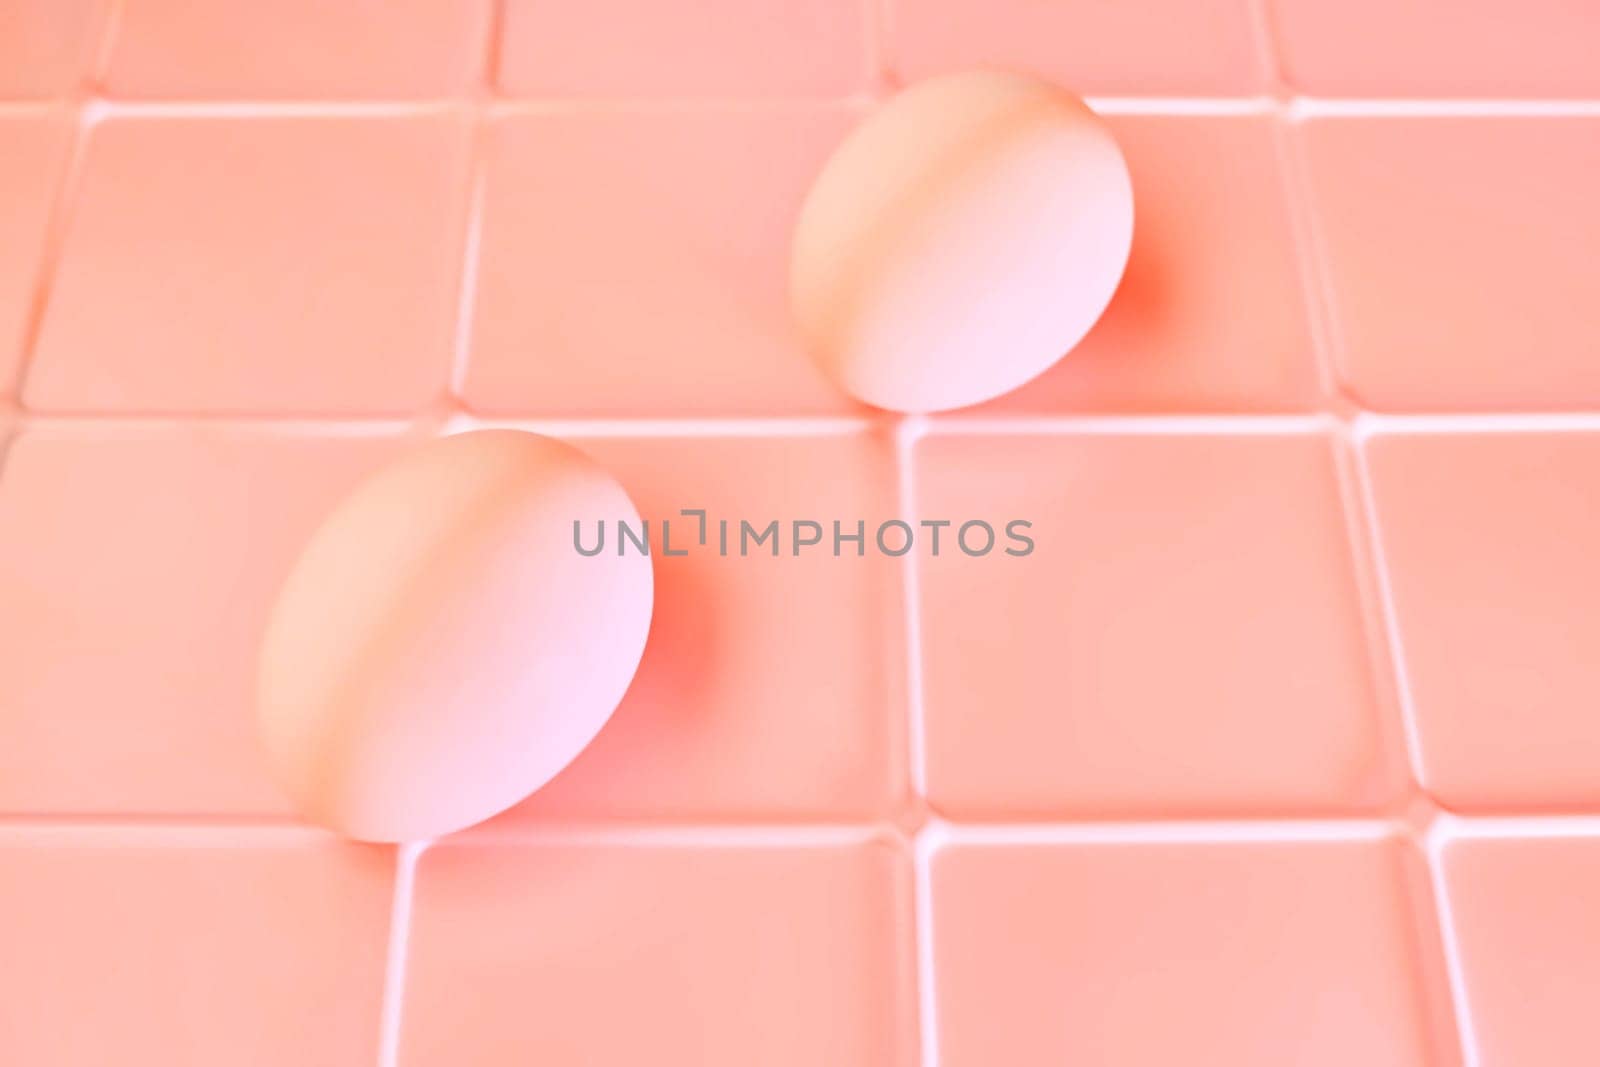 Two chicken bird eggs on a pink plastic checkered shelf in the fridge by jovani68